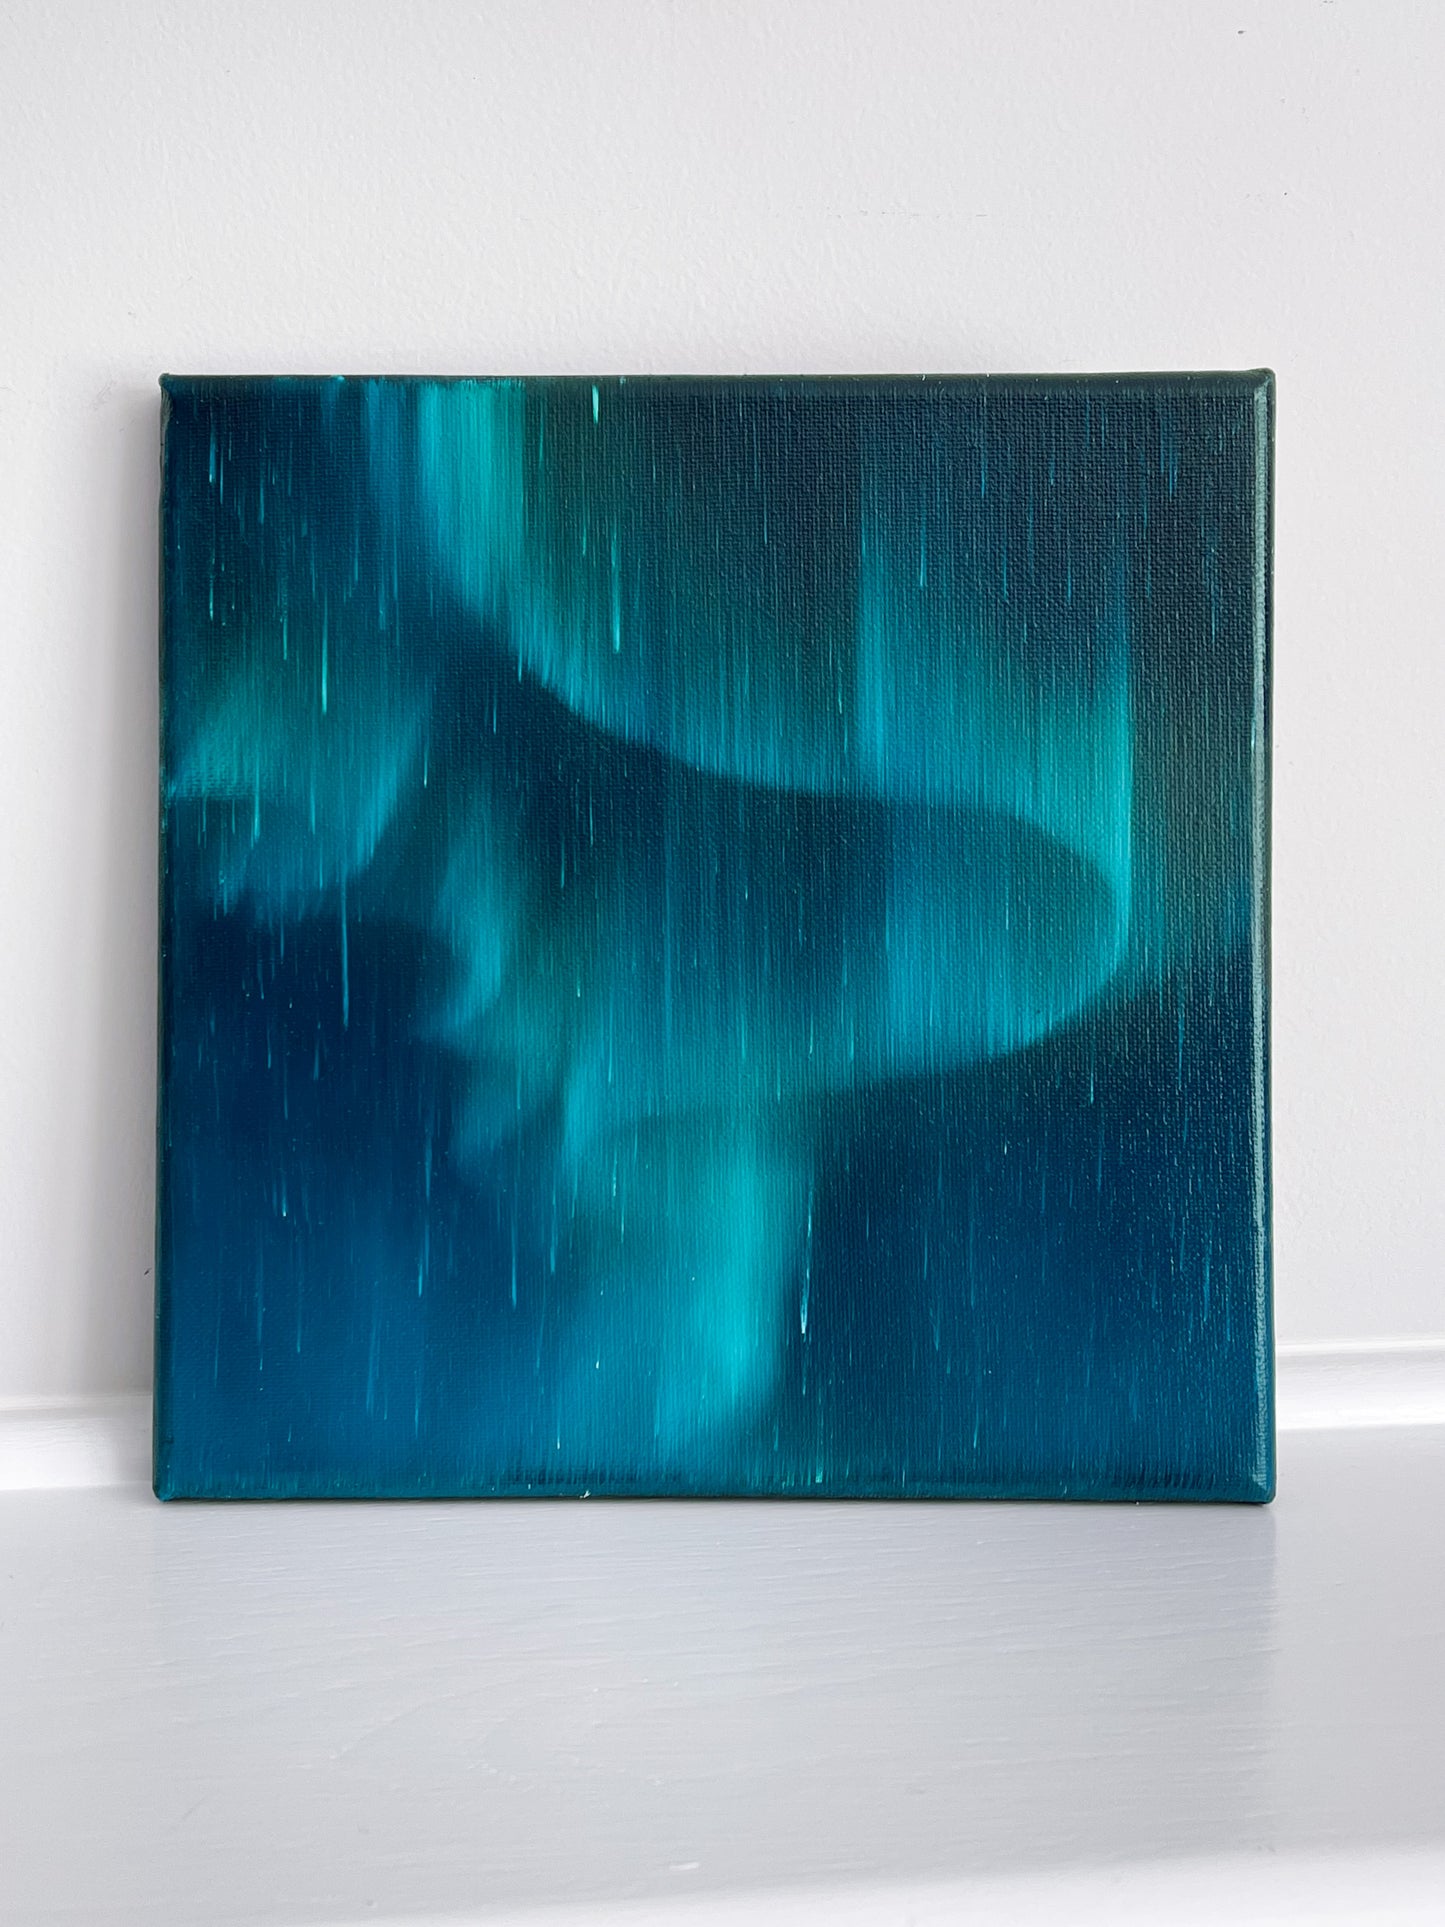 Northern Waves - Reserved for auction winner Ellyn Cole